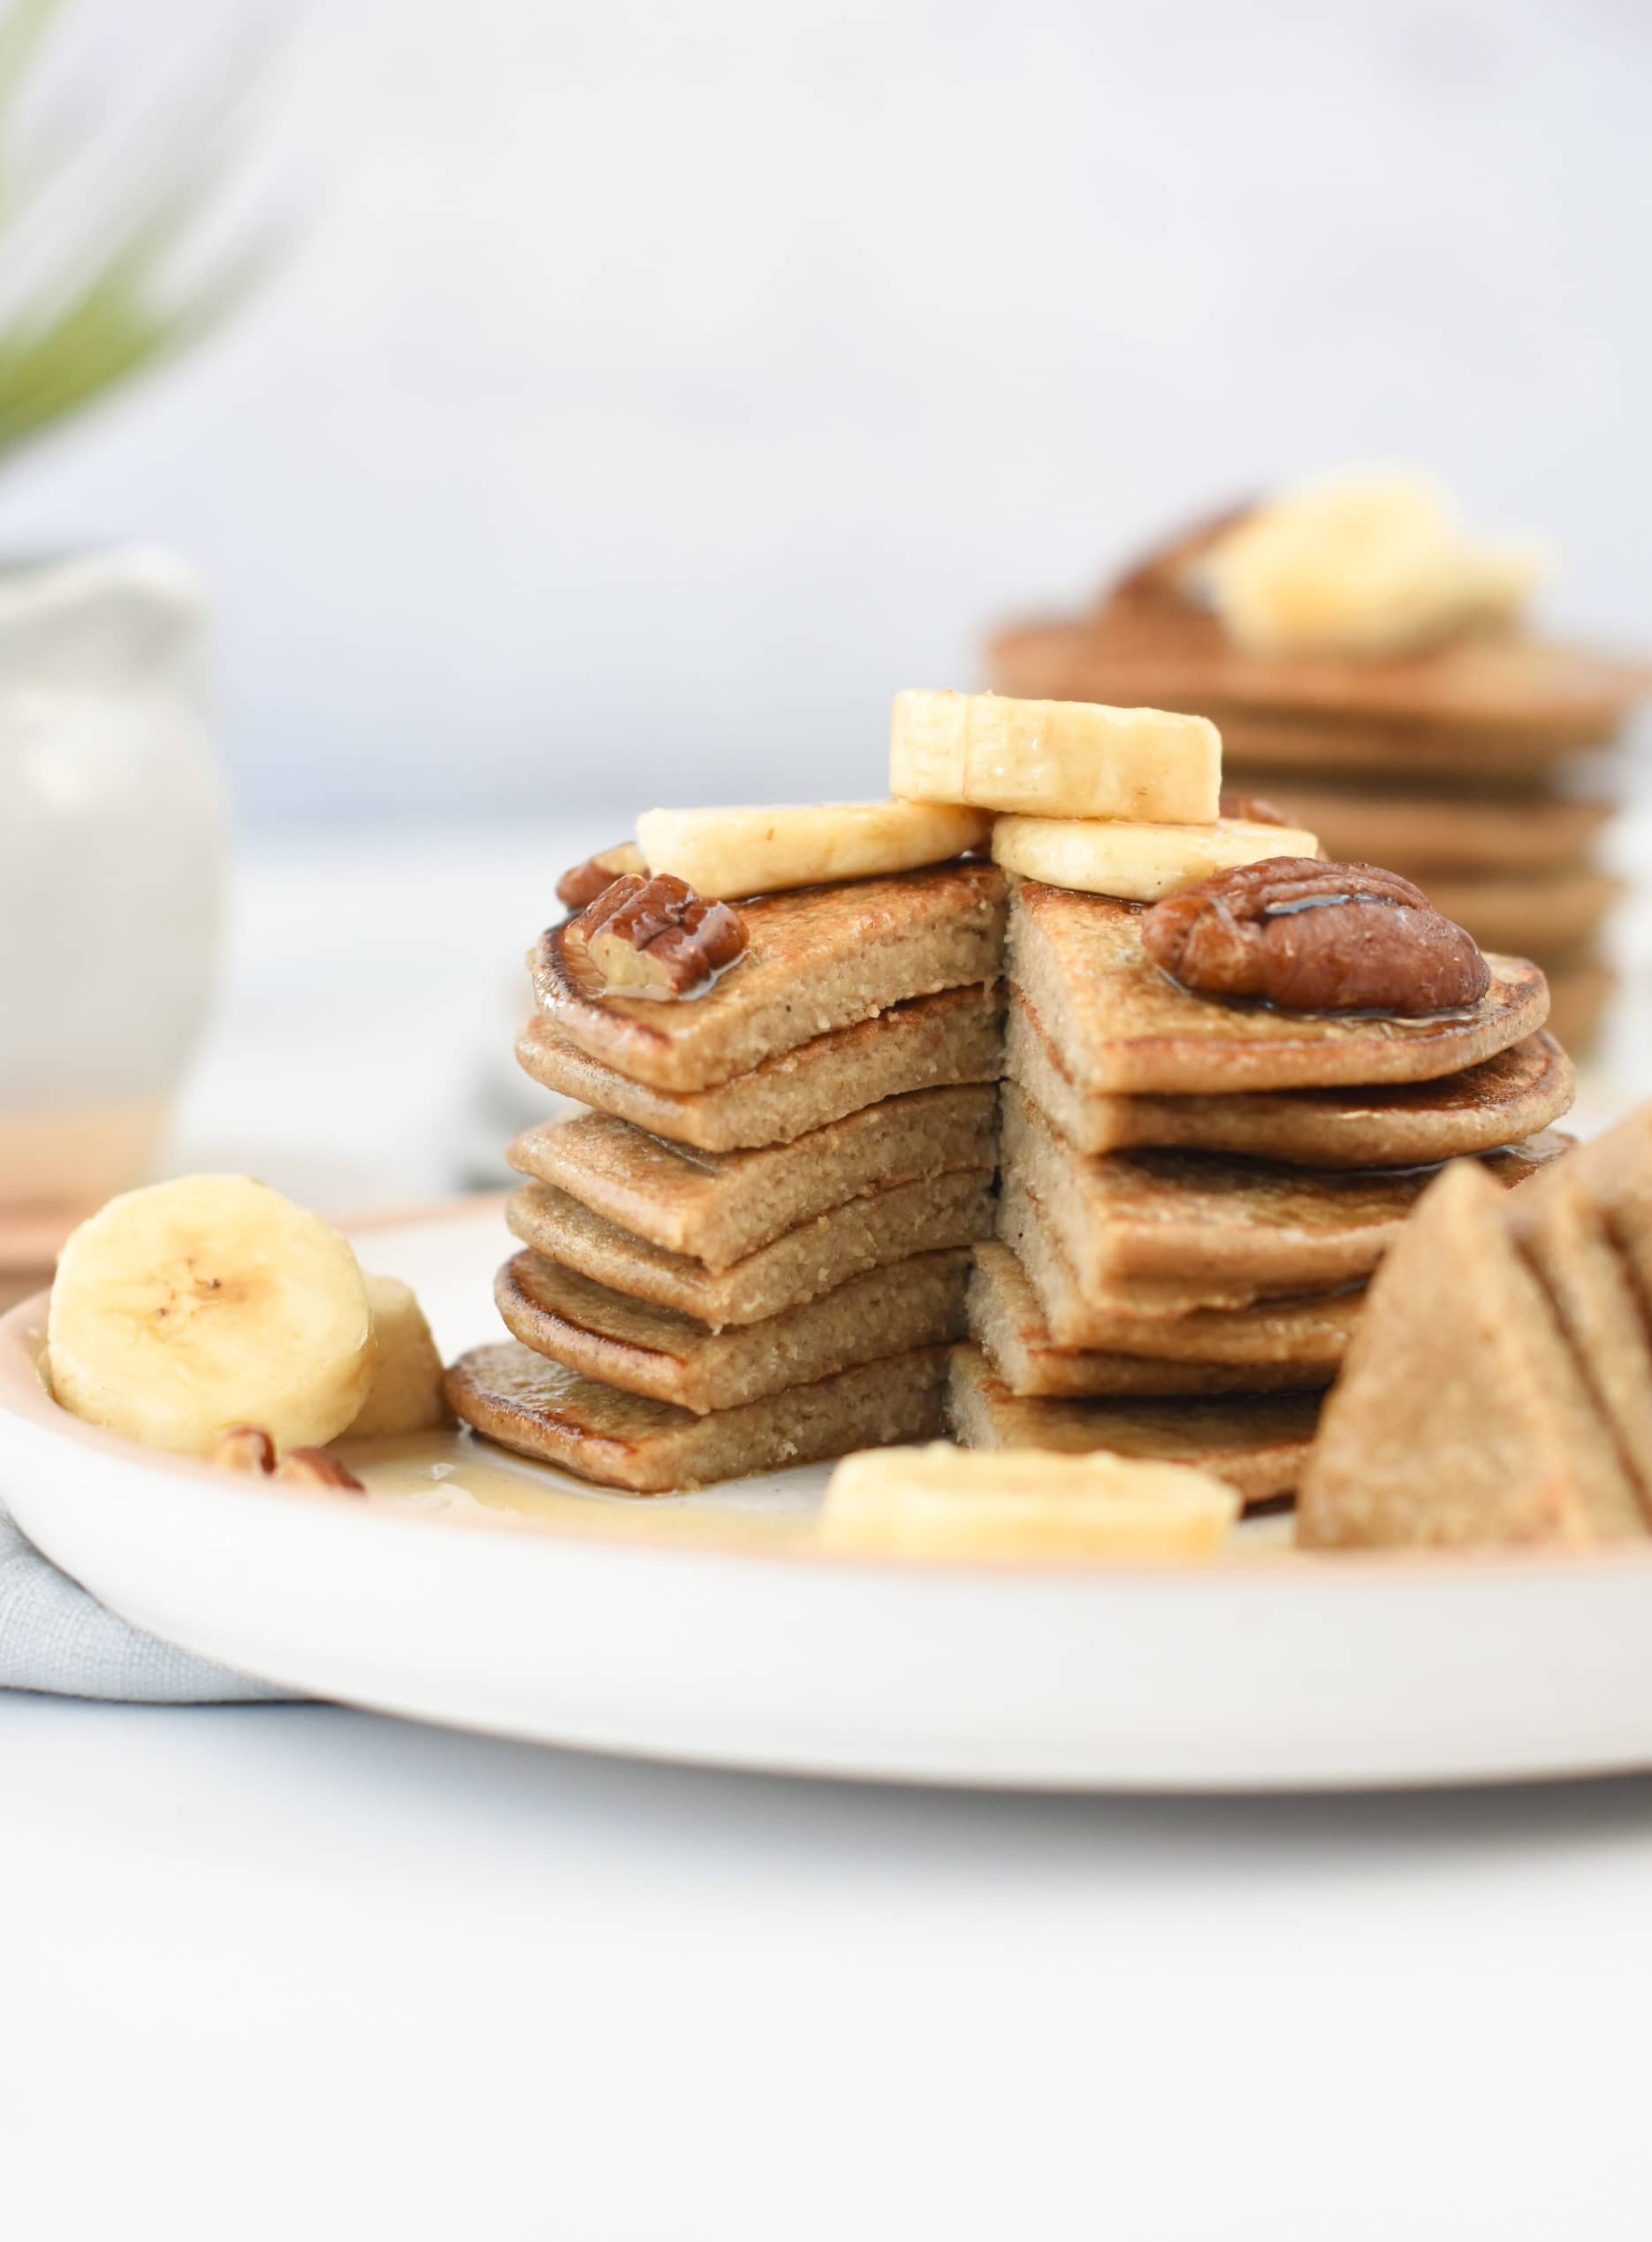 3-Ingredient Banana Oat Pancakes served as a stack on a white plate and decorated with banana slices, pecan nuts, and maple syrup.